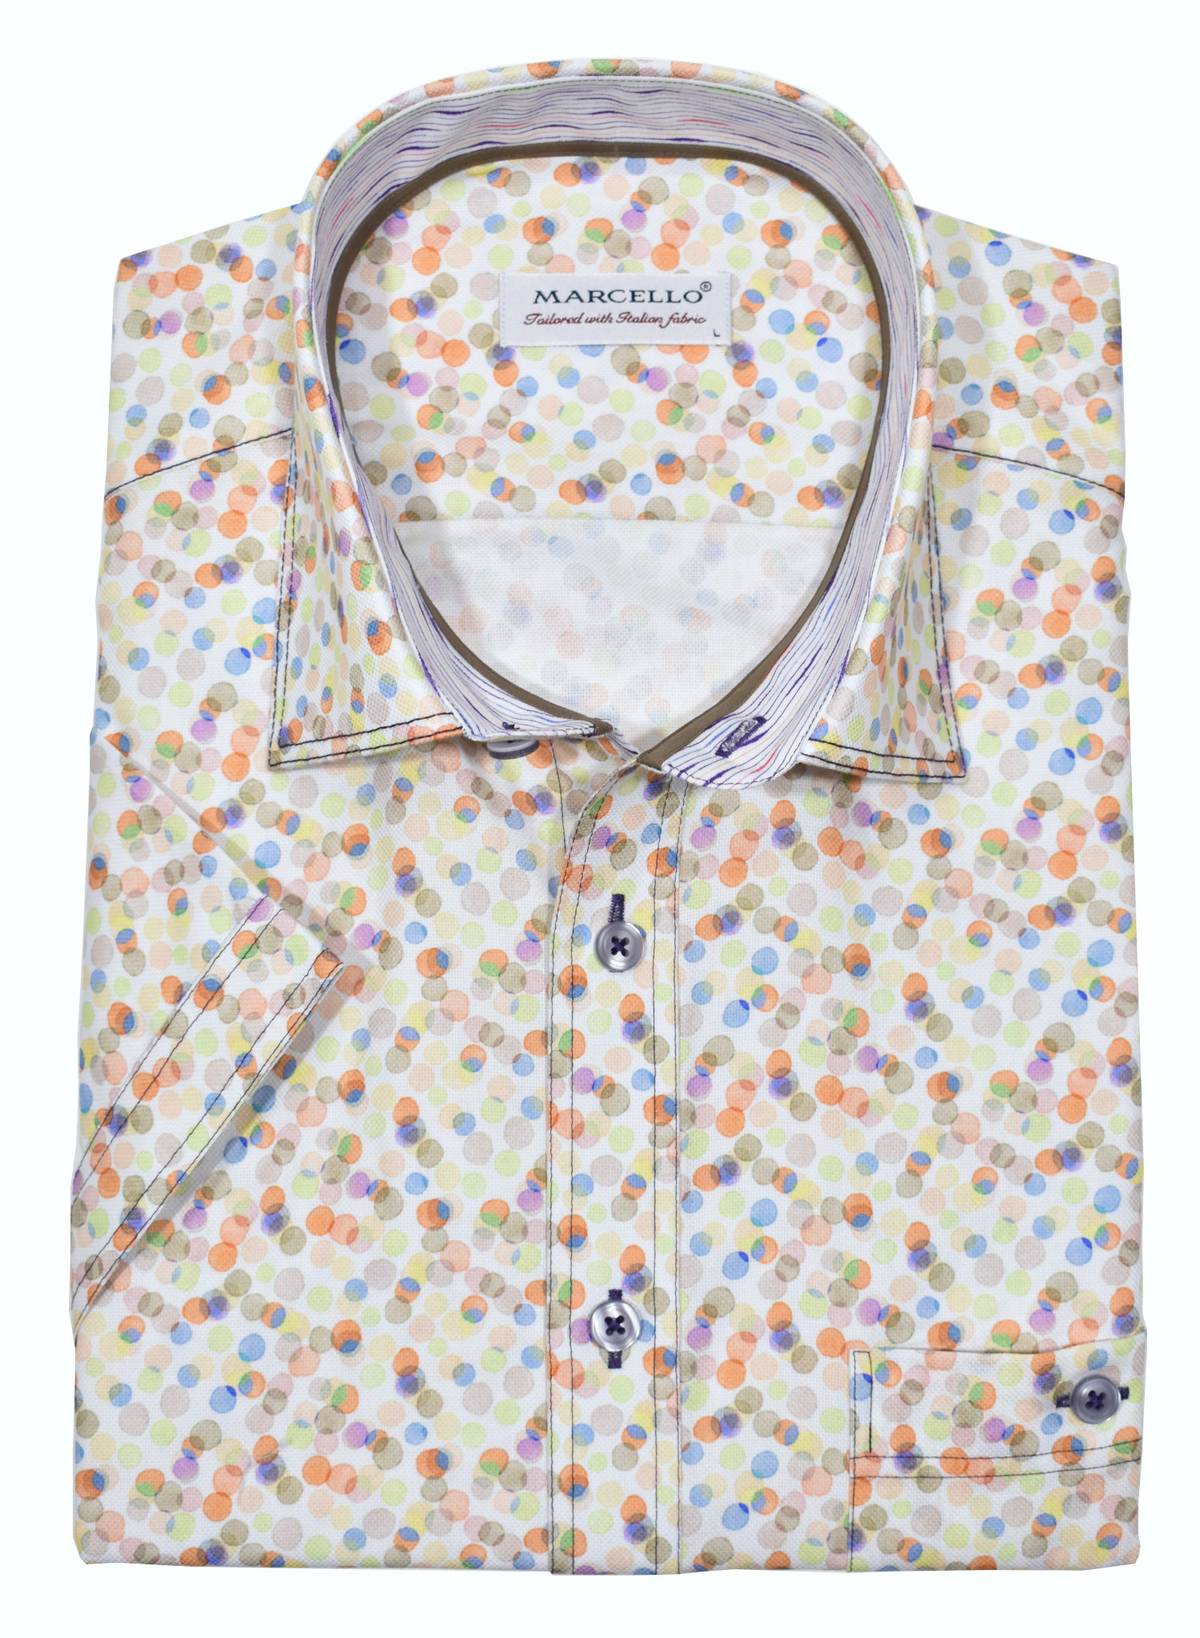 Elevate your style while frequenting the cafes or boardwalk with a soft cotton, royal oxford fabric, featuring an updated colored dot pattern.  Playful yet sophisticated to suit any image you are looking for.  Details include accent trim fabric, contrast double stitching and a buttoned chest pocket.